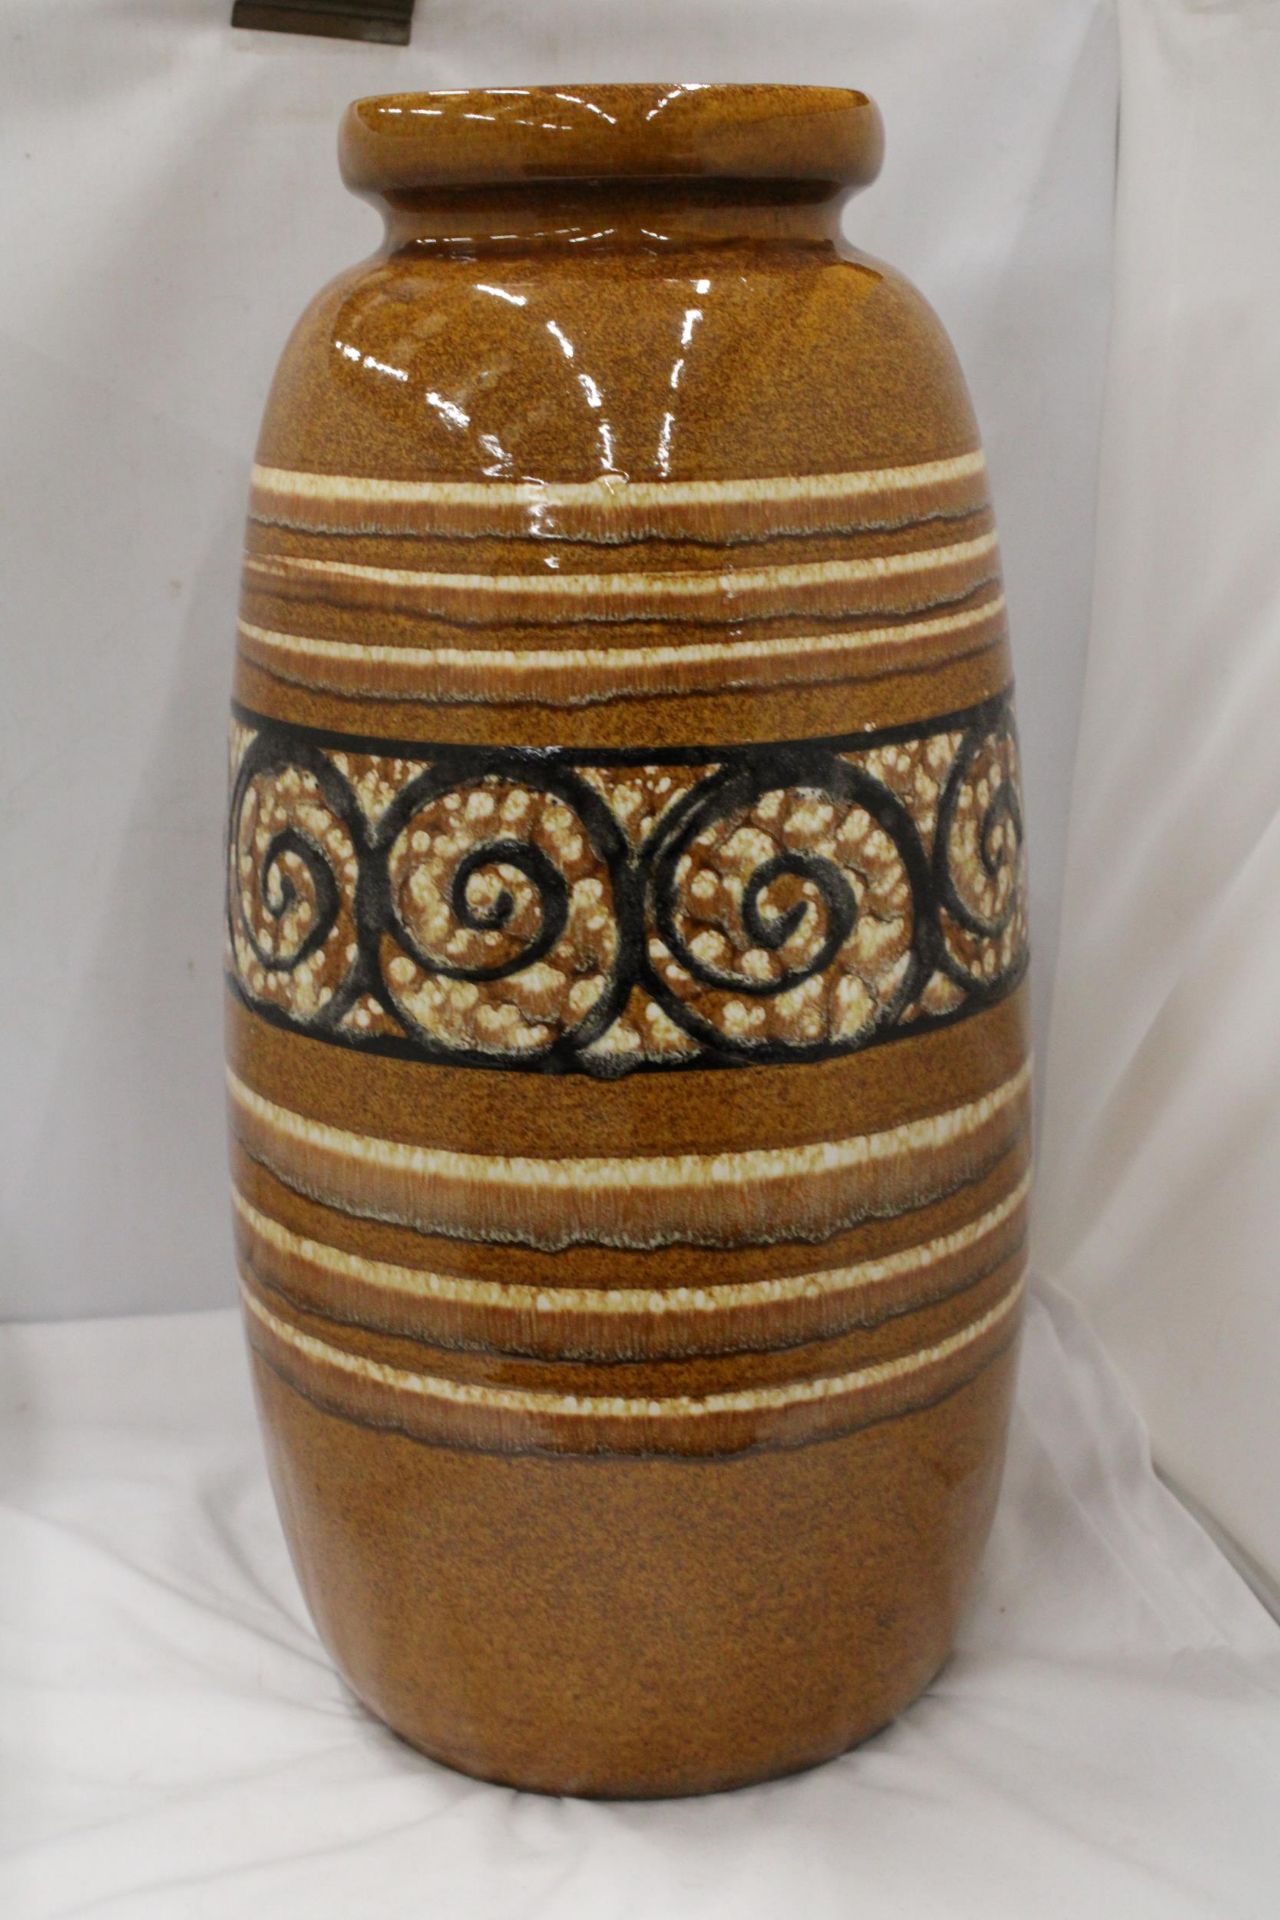 A VERY LARGE WEST GERMAN VASE, HEIGHT 55CM - Image 2 of 4